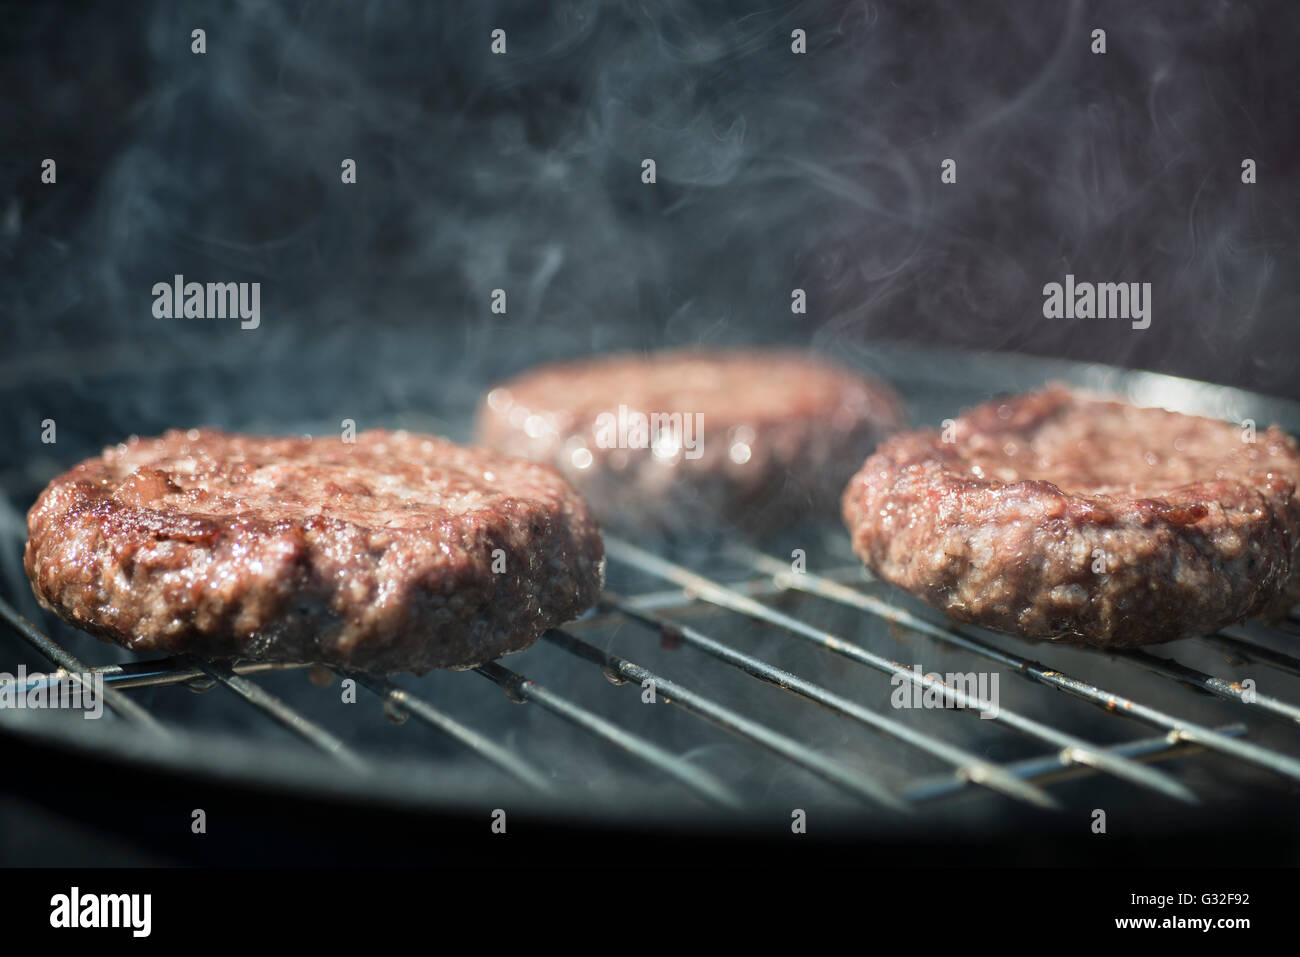 Burgers cooking on a Barbecue Stock Photo - Alamy